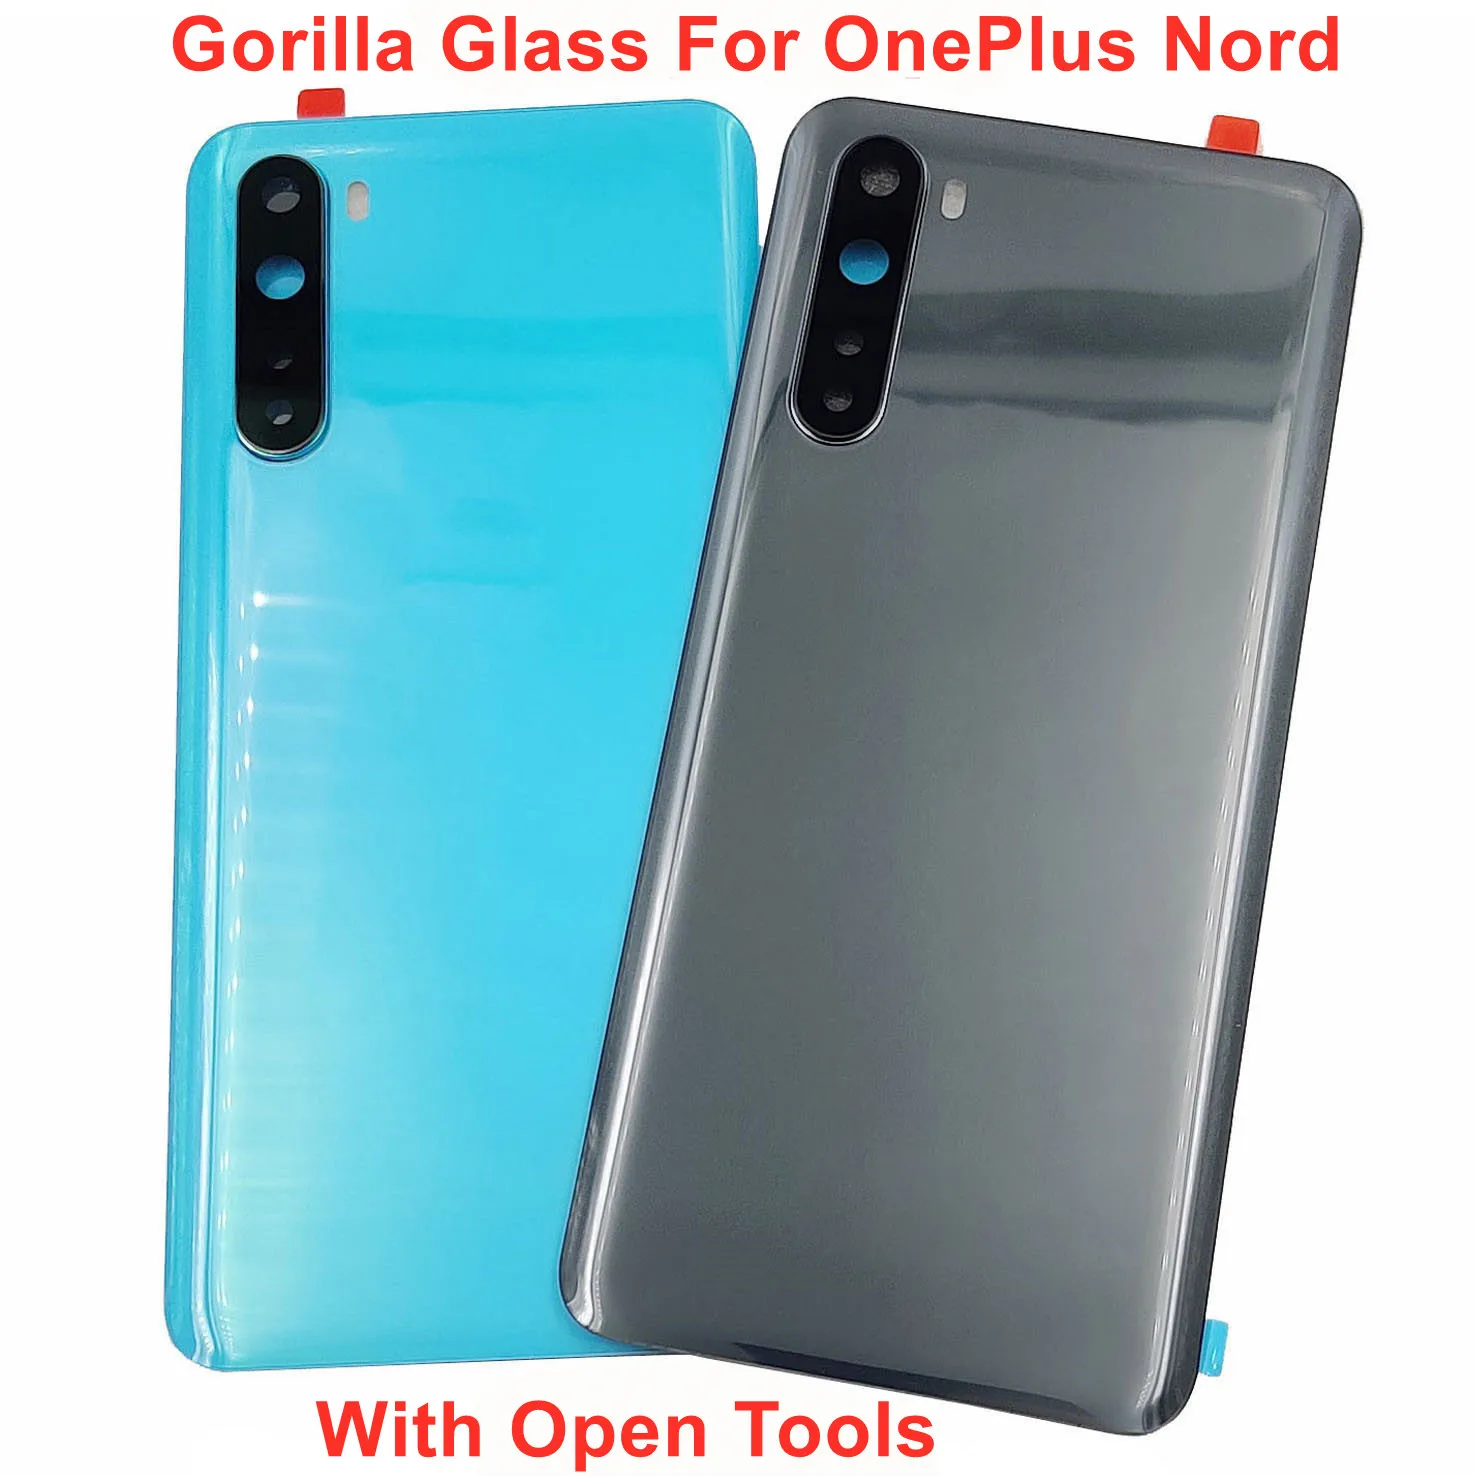 

For OnePlus Nord Original New Gorilla Glass Battery Cover Hard Back Door Lid Rear Housing Panel Case + Camera Lens Adhesive